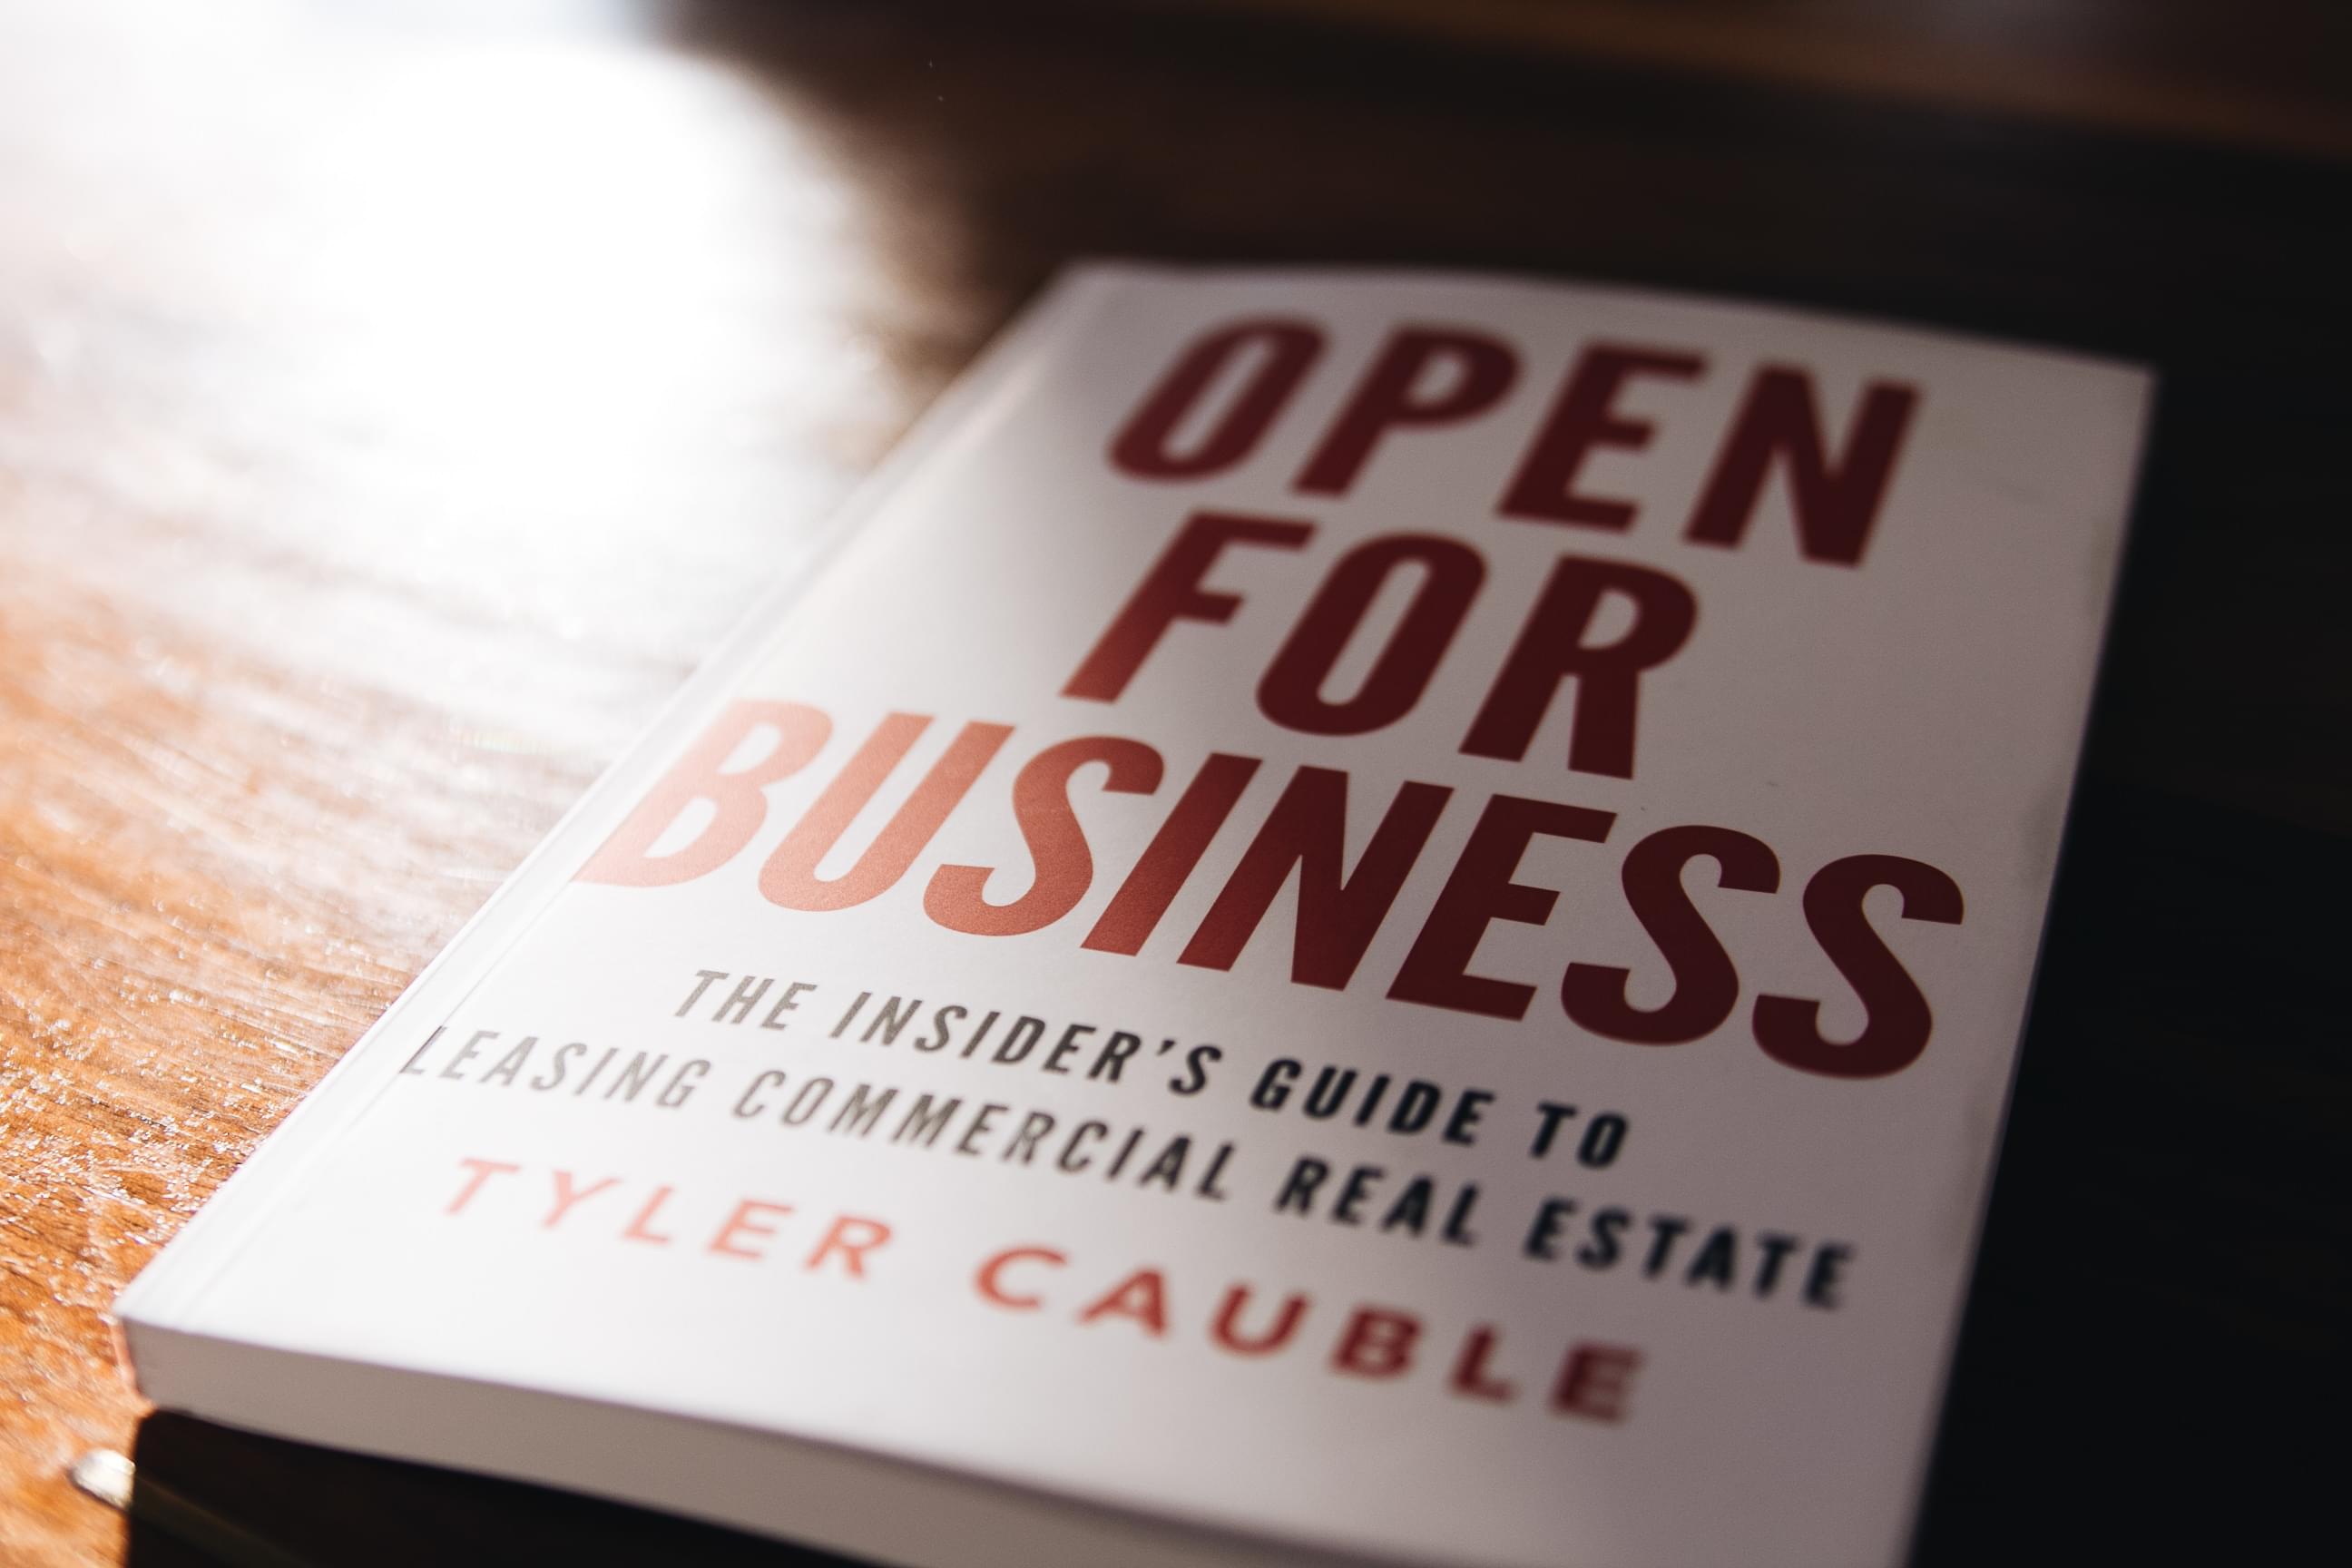 Open for Business: The Insider's Guide to Leasing Commercial Real Estate